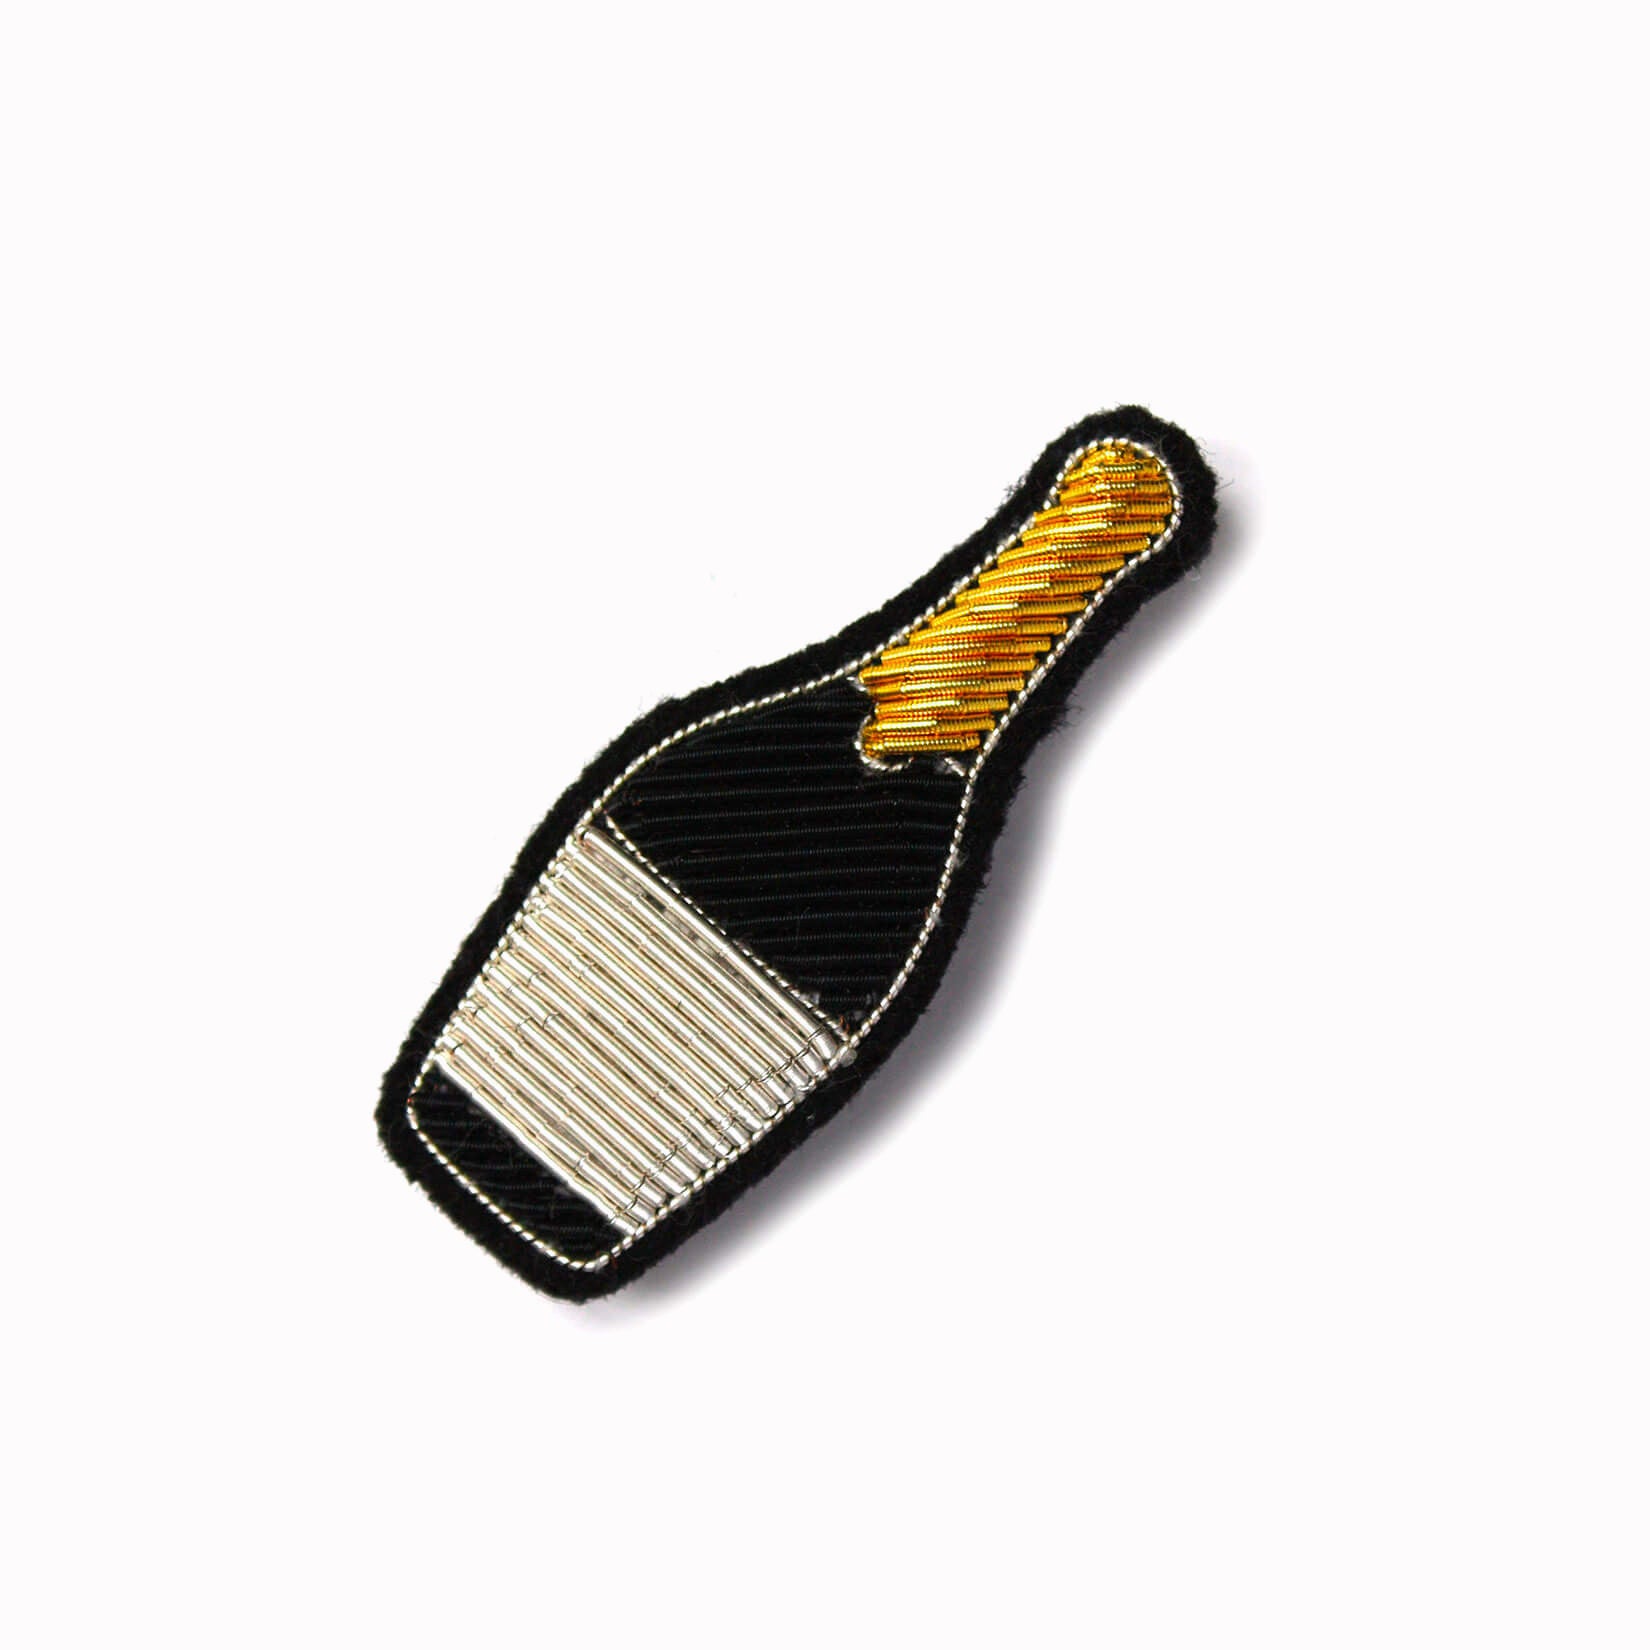 Celebrate! Elegant Champagne bottle hand-embroidered lapel pin.From Macon & Lesquoy, French Hand Embroidered badges and patches using Cannetille thread,